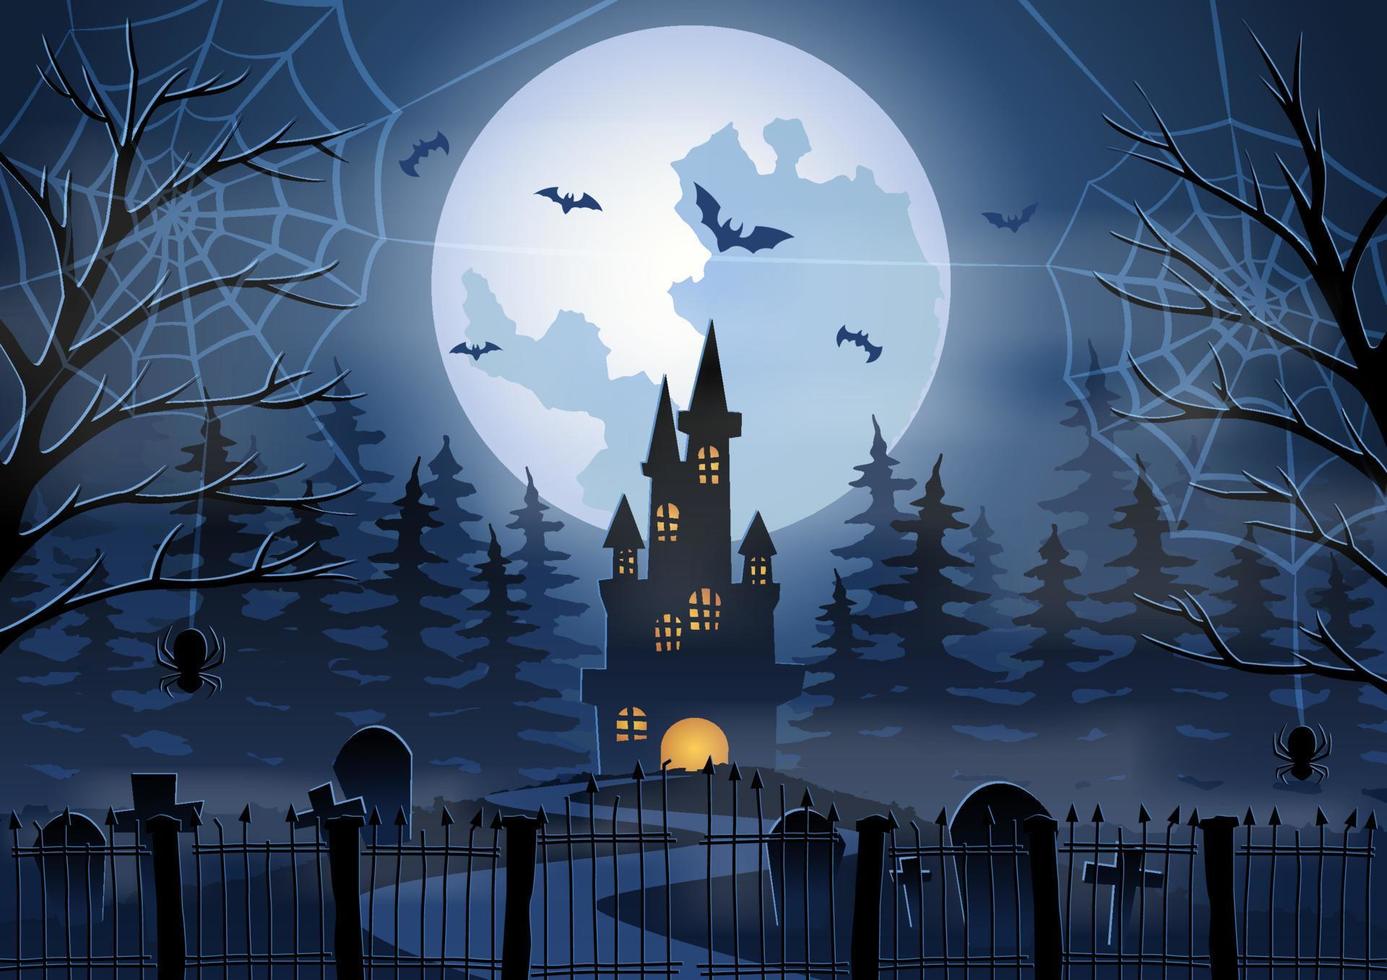 Halloween background with graveyard and Castle scene on Halloween night vector